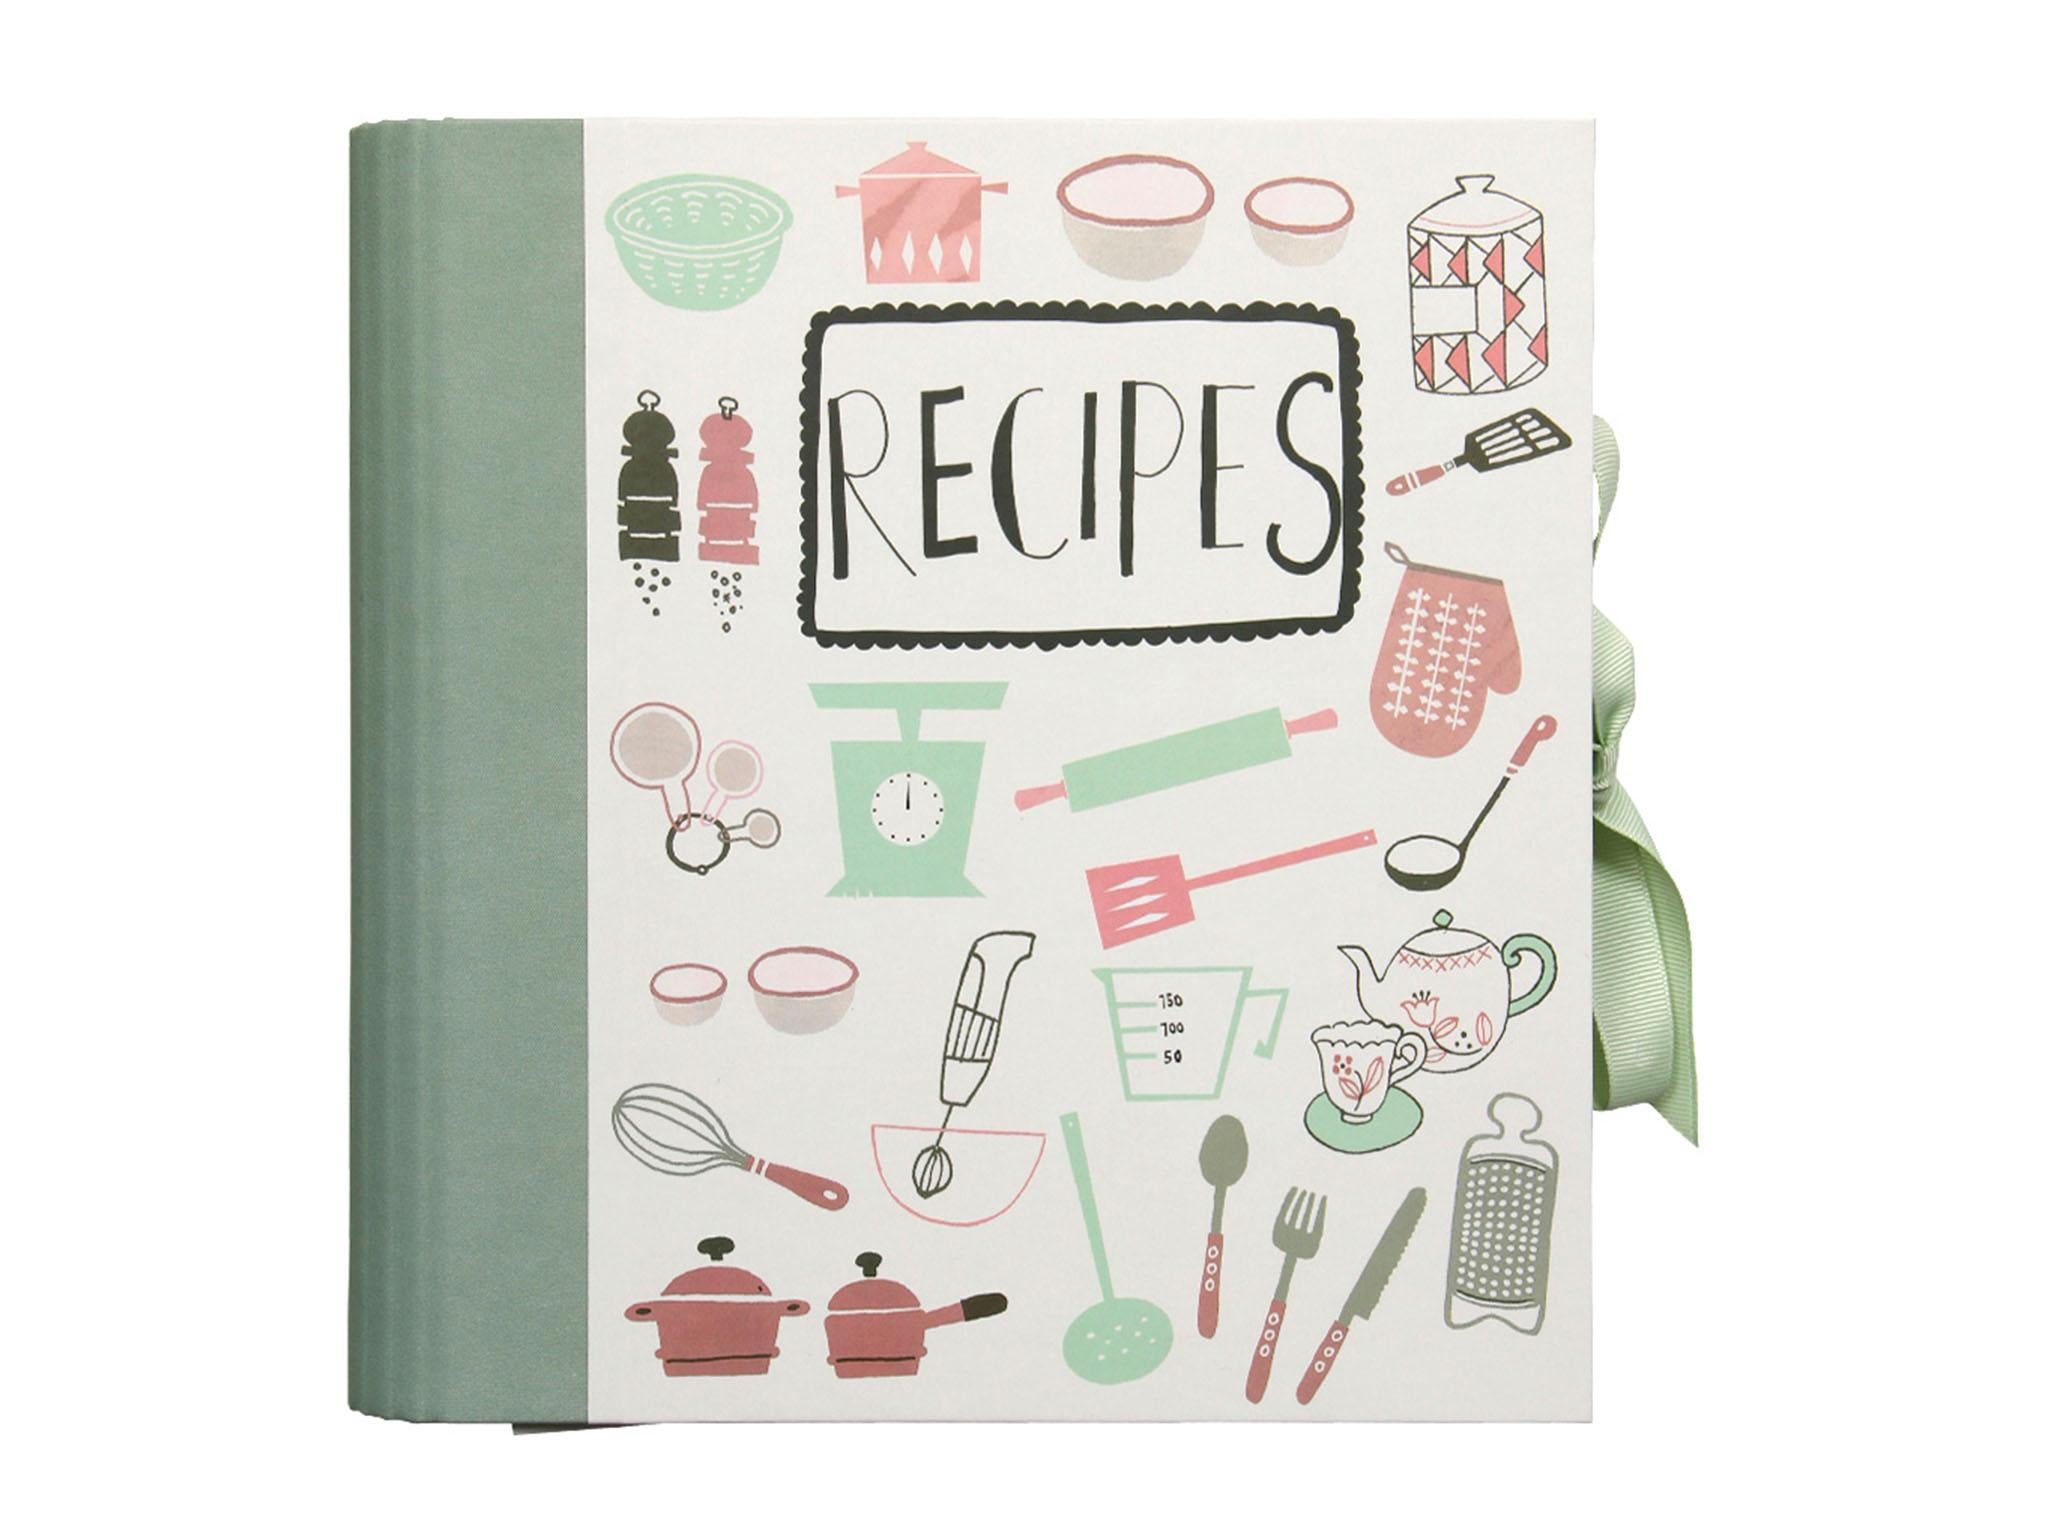 https://static.independent.co.uk/s3fs-public/thumbnails/image/2019/08/30/09/paperchase-utensils-recipe-file-ps15-paperchase-1.jpg